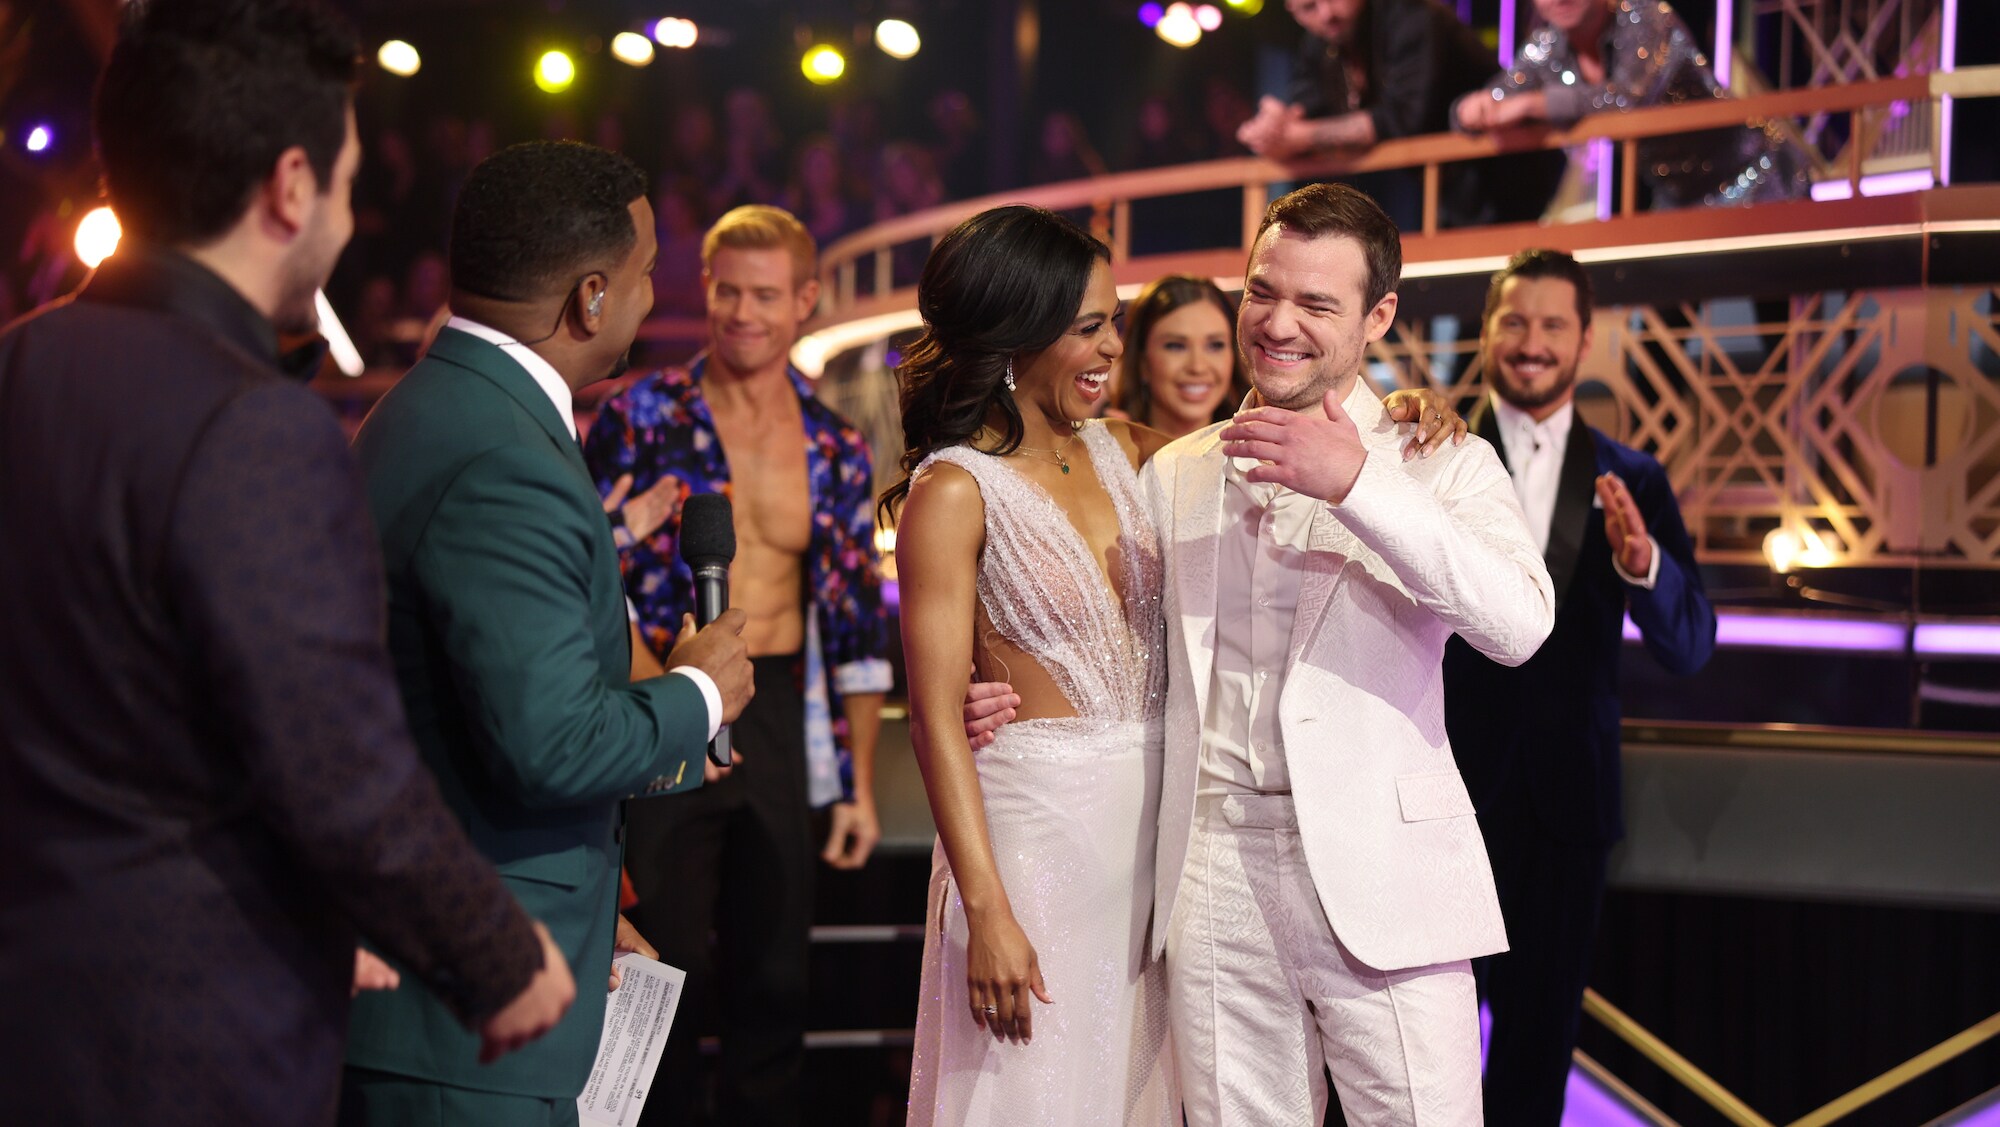 DANCING WITH THE STARS - “Semi-Finals” – The mirrorball competition heats up as the six remaining contestants head into the “Semi-Finals.” Each couple will perform two all-new routines as they fight for a spot in the finale. A new episode of “Dancing with the Stars” will stream live MONDAY, NOV. 14 (8:00pm ET / 5:00pm PT), on Disney+. (ABC/Raymond Liu) BRITT STEWART, DANIEL DURANT